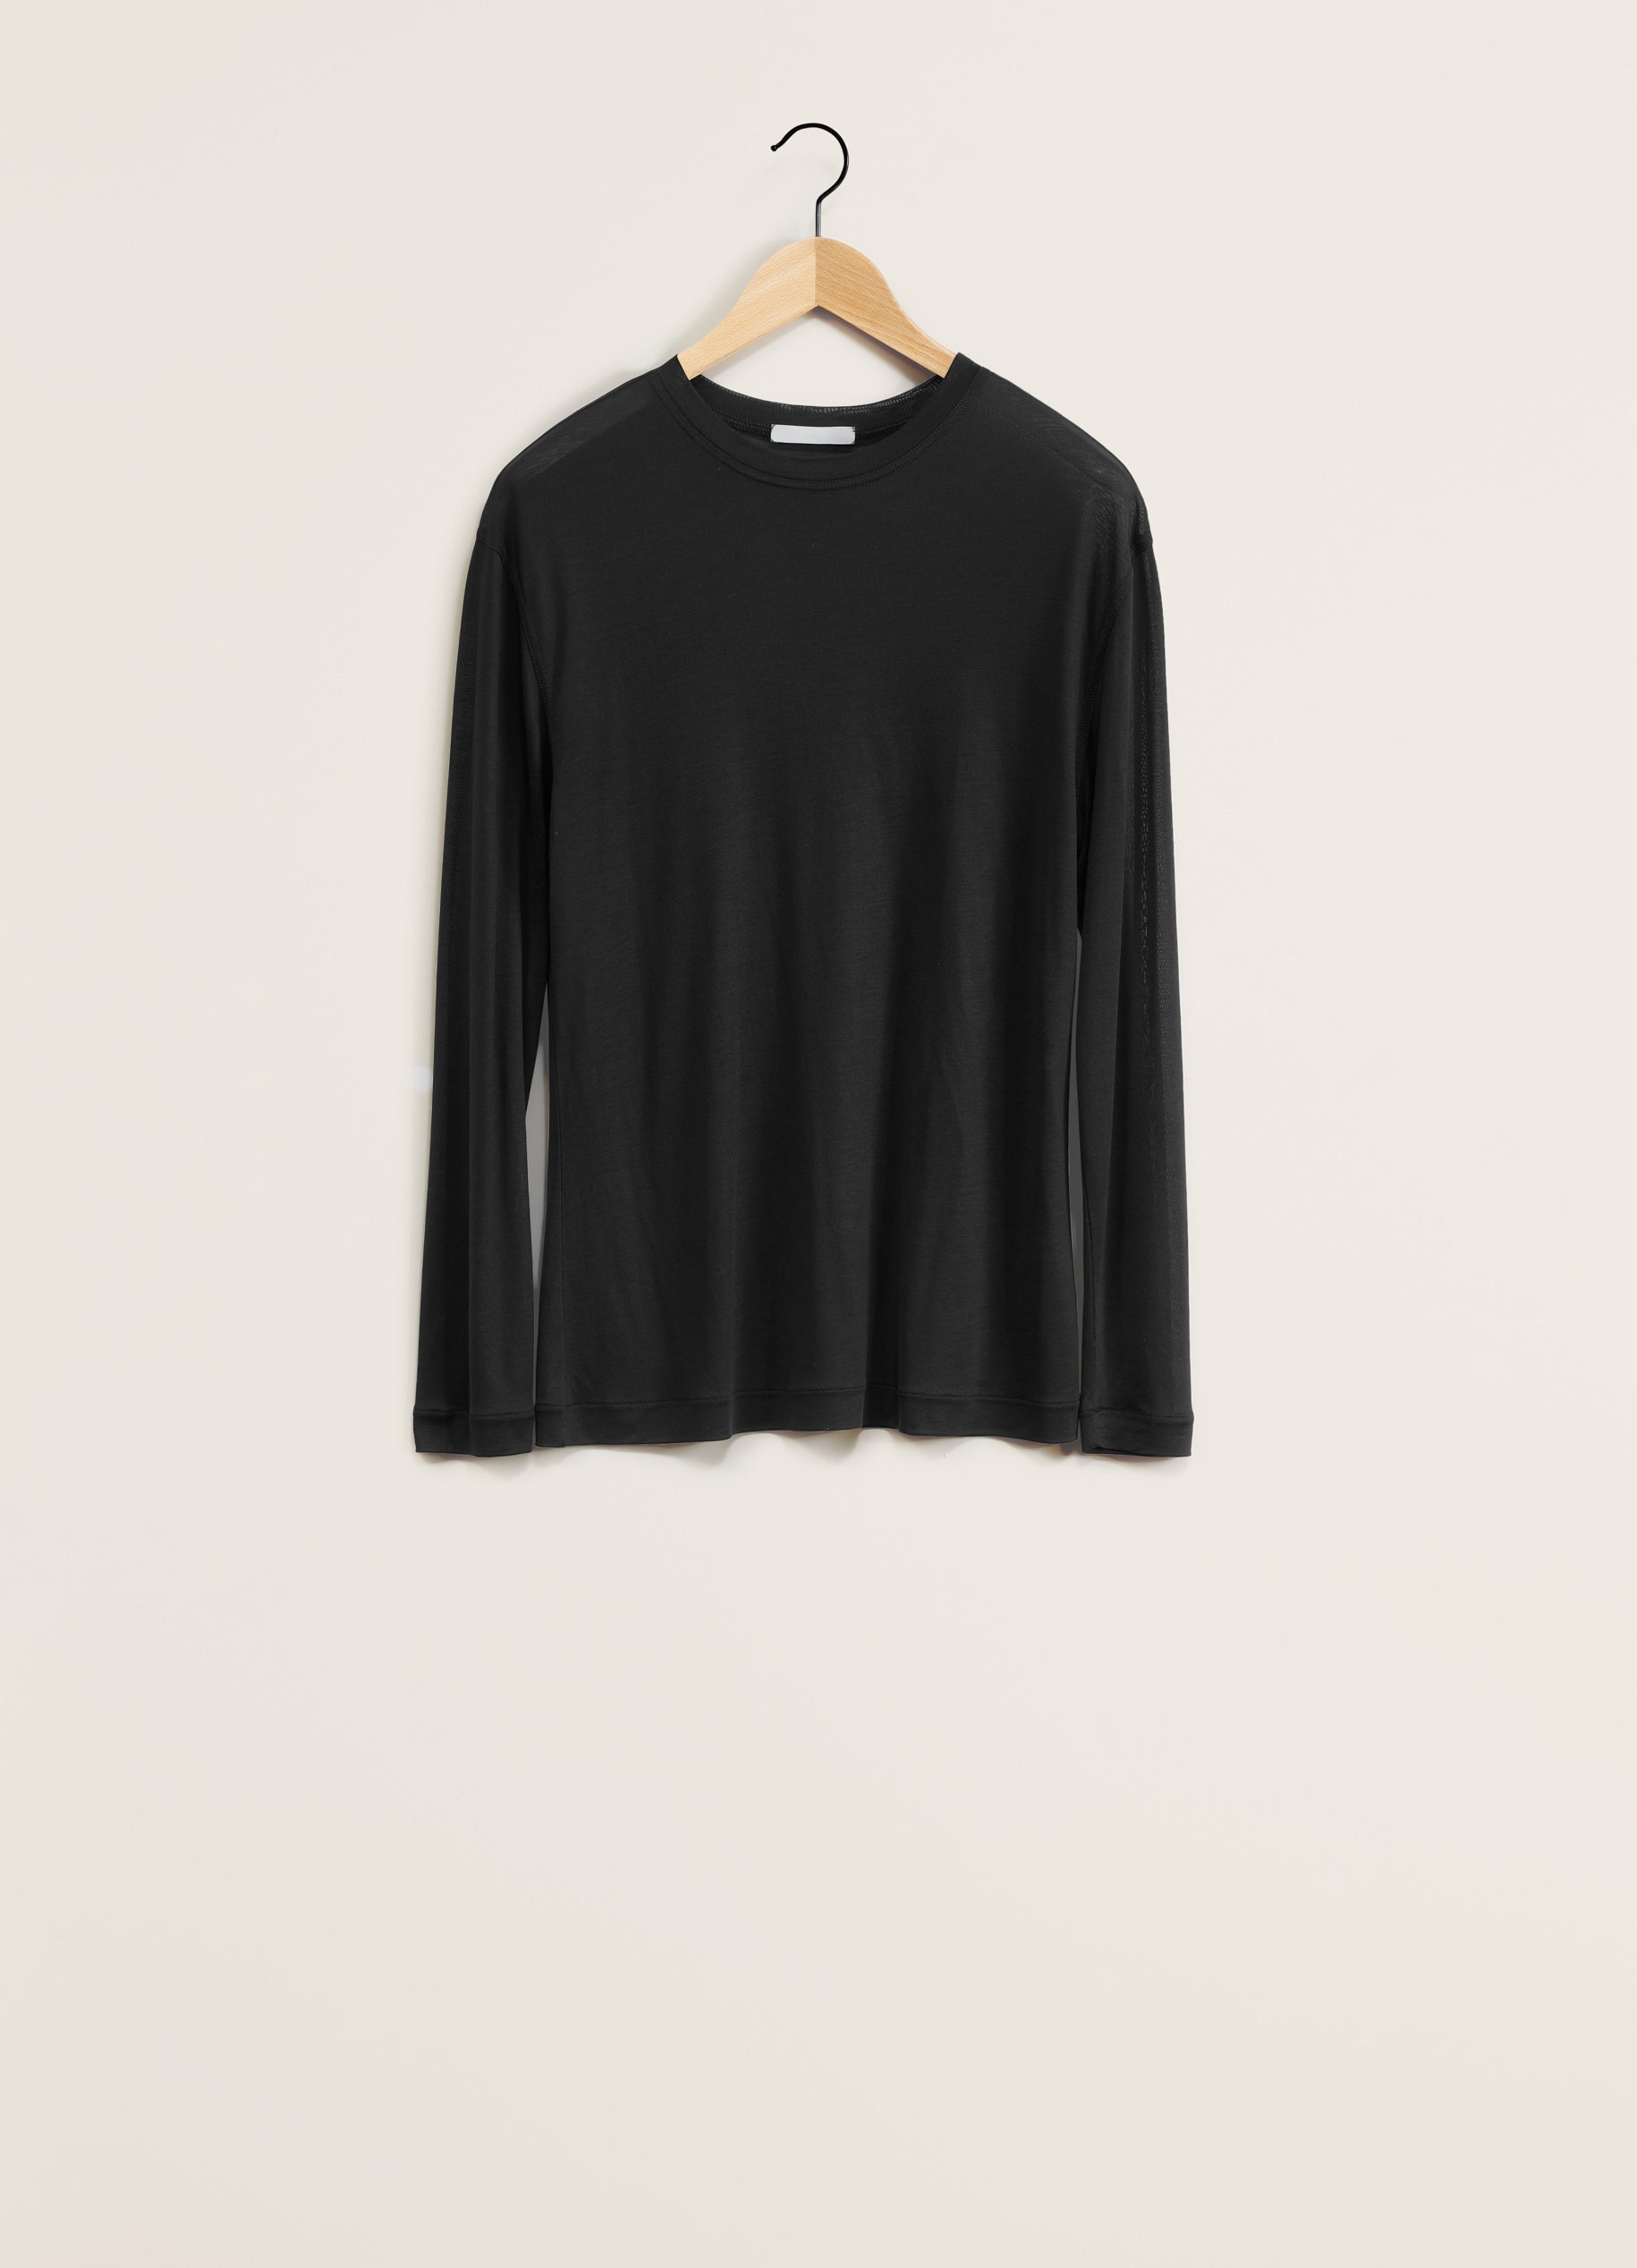 Black Ss Draped Shirt in Gd Cotton Poplin | LEMAIRE